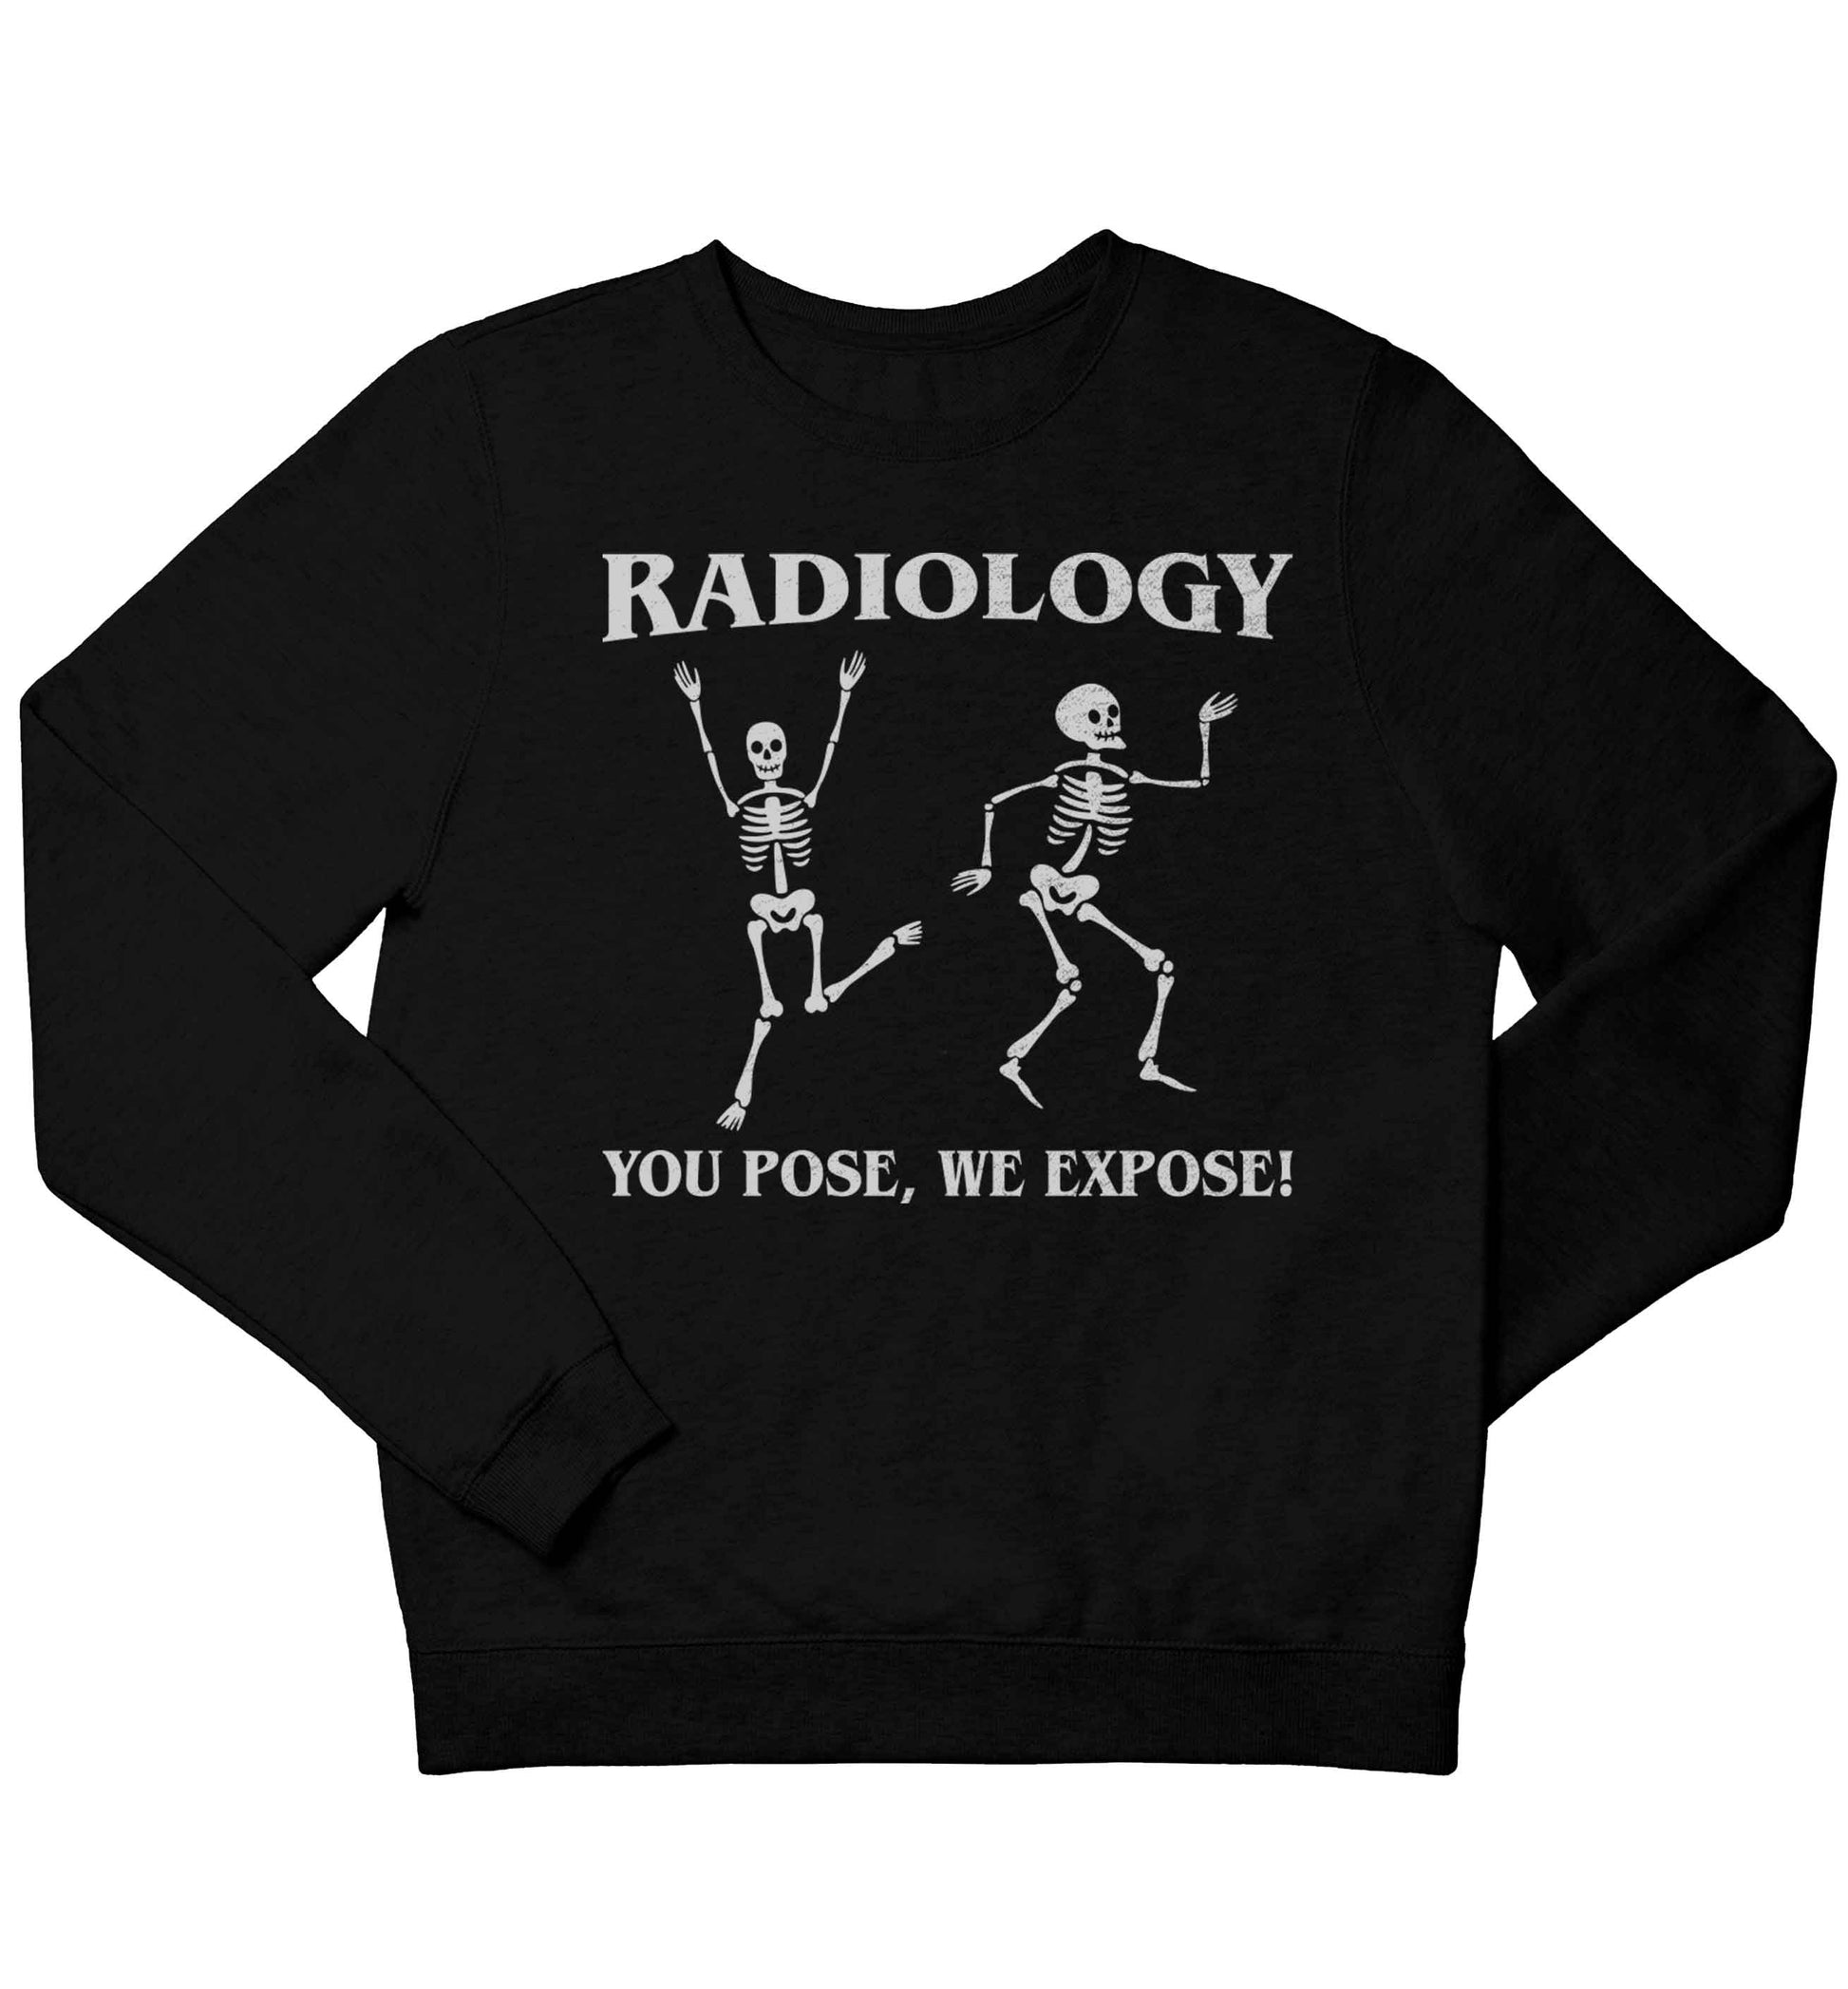 Radiology you pose we expose children's black sweater 12-13 Years